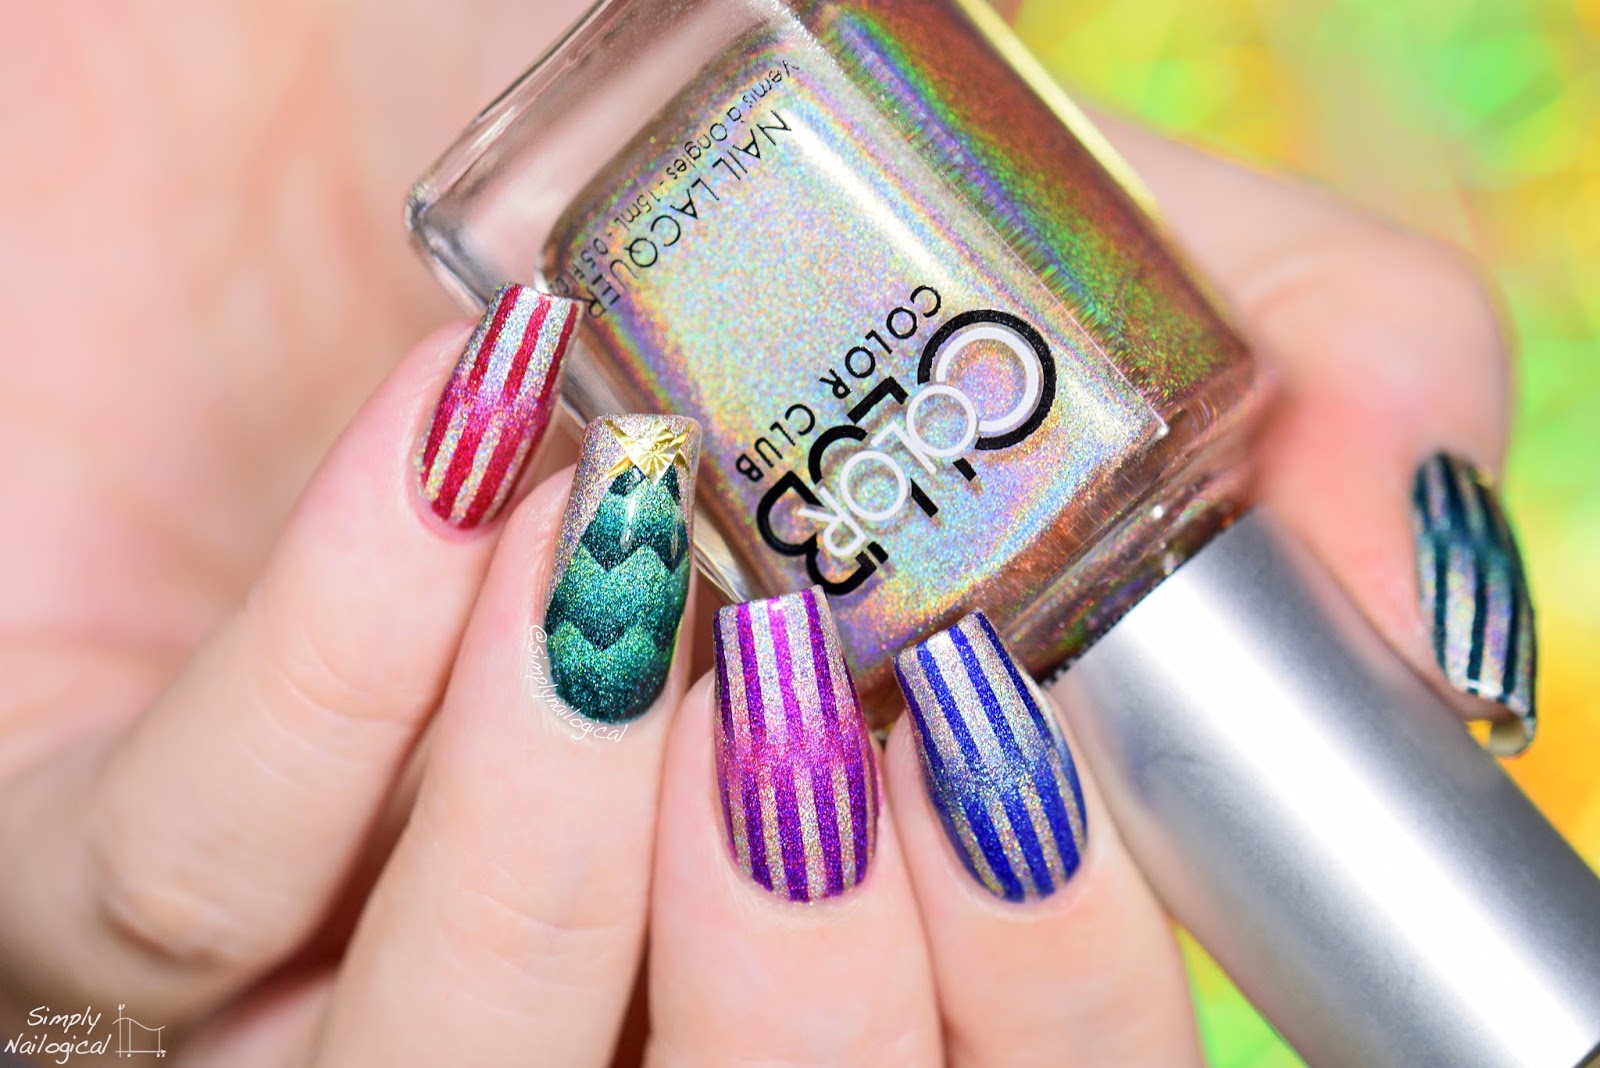 8. Simply Nailogical's Favorite Gradient Nail Art Techniques - wide 5